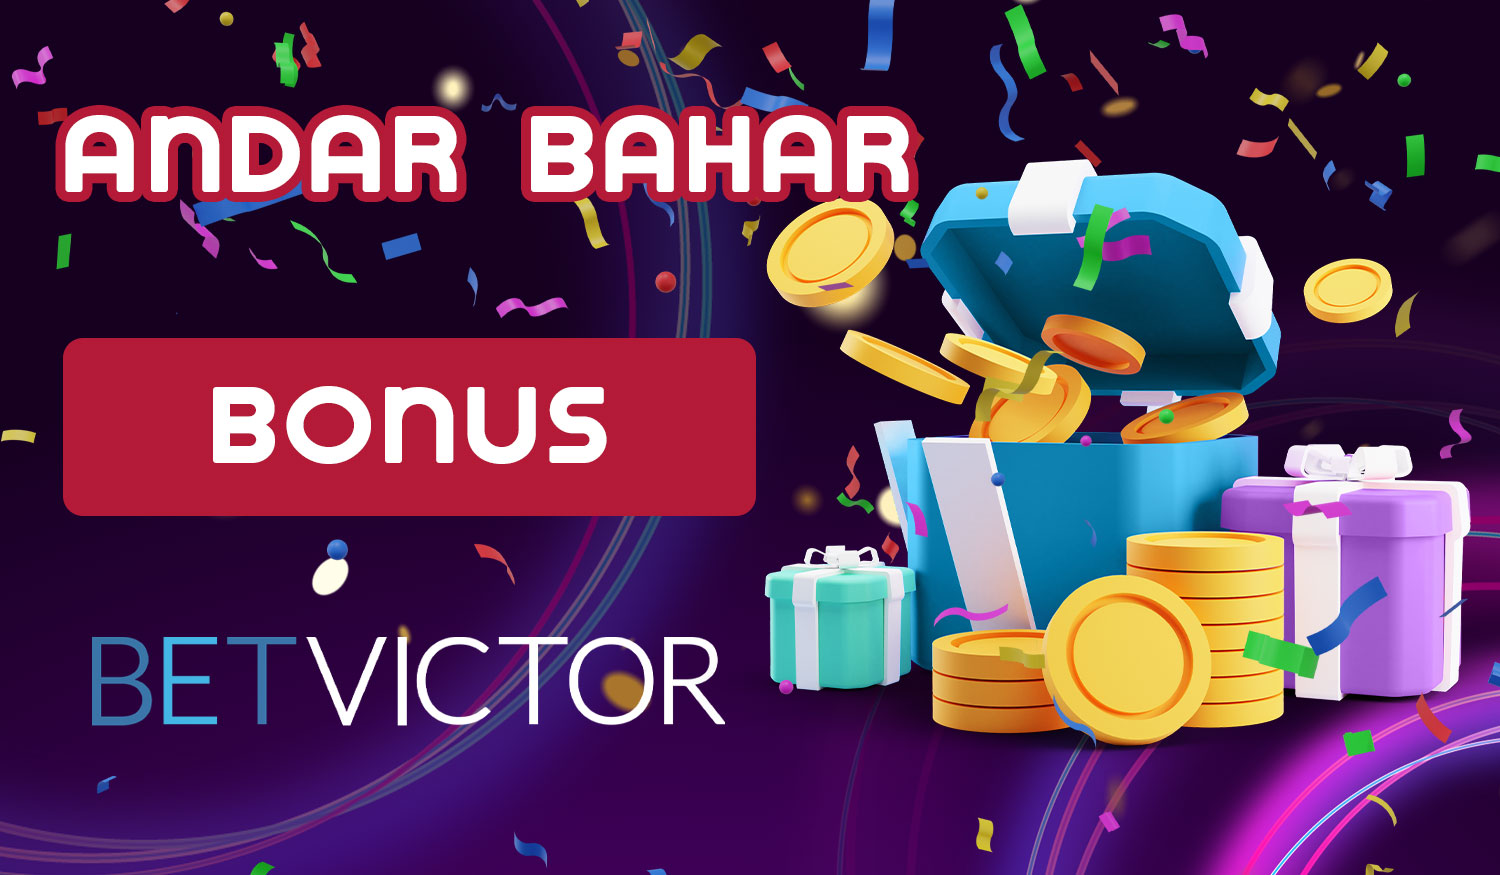 BetVictor India offers generous bonuses for registration and deposit